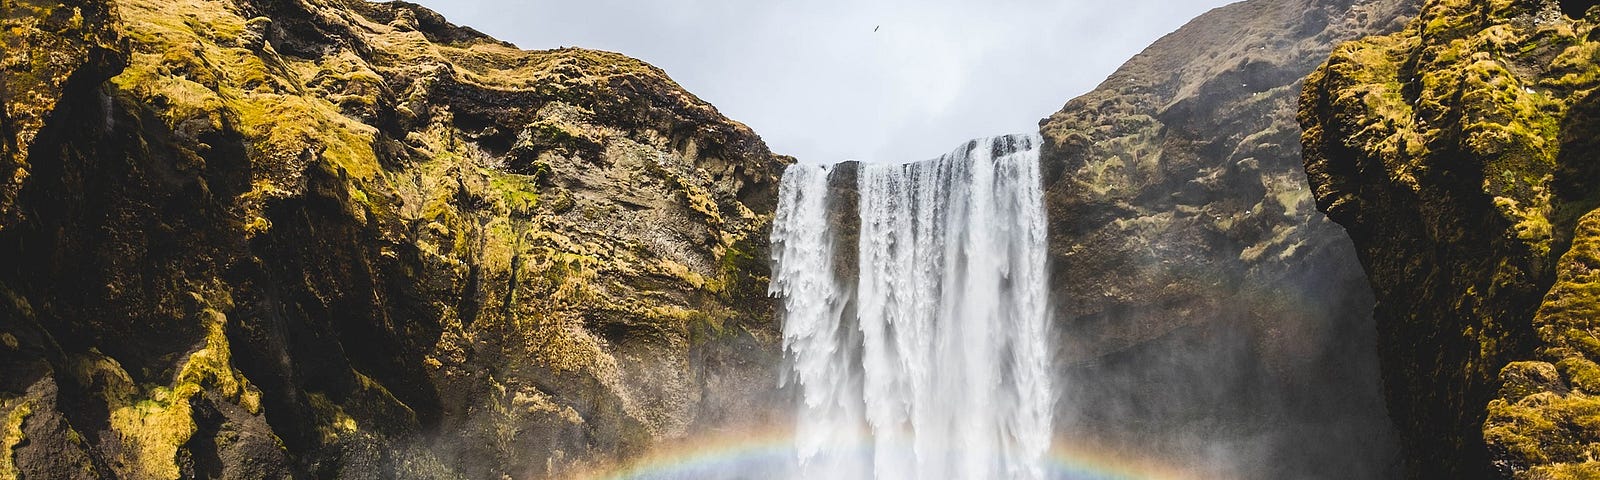 Stream of water falling downward from a cliff creating a waterfall with a rainbow behind it